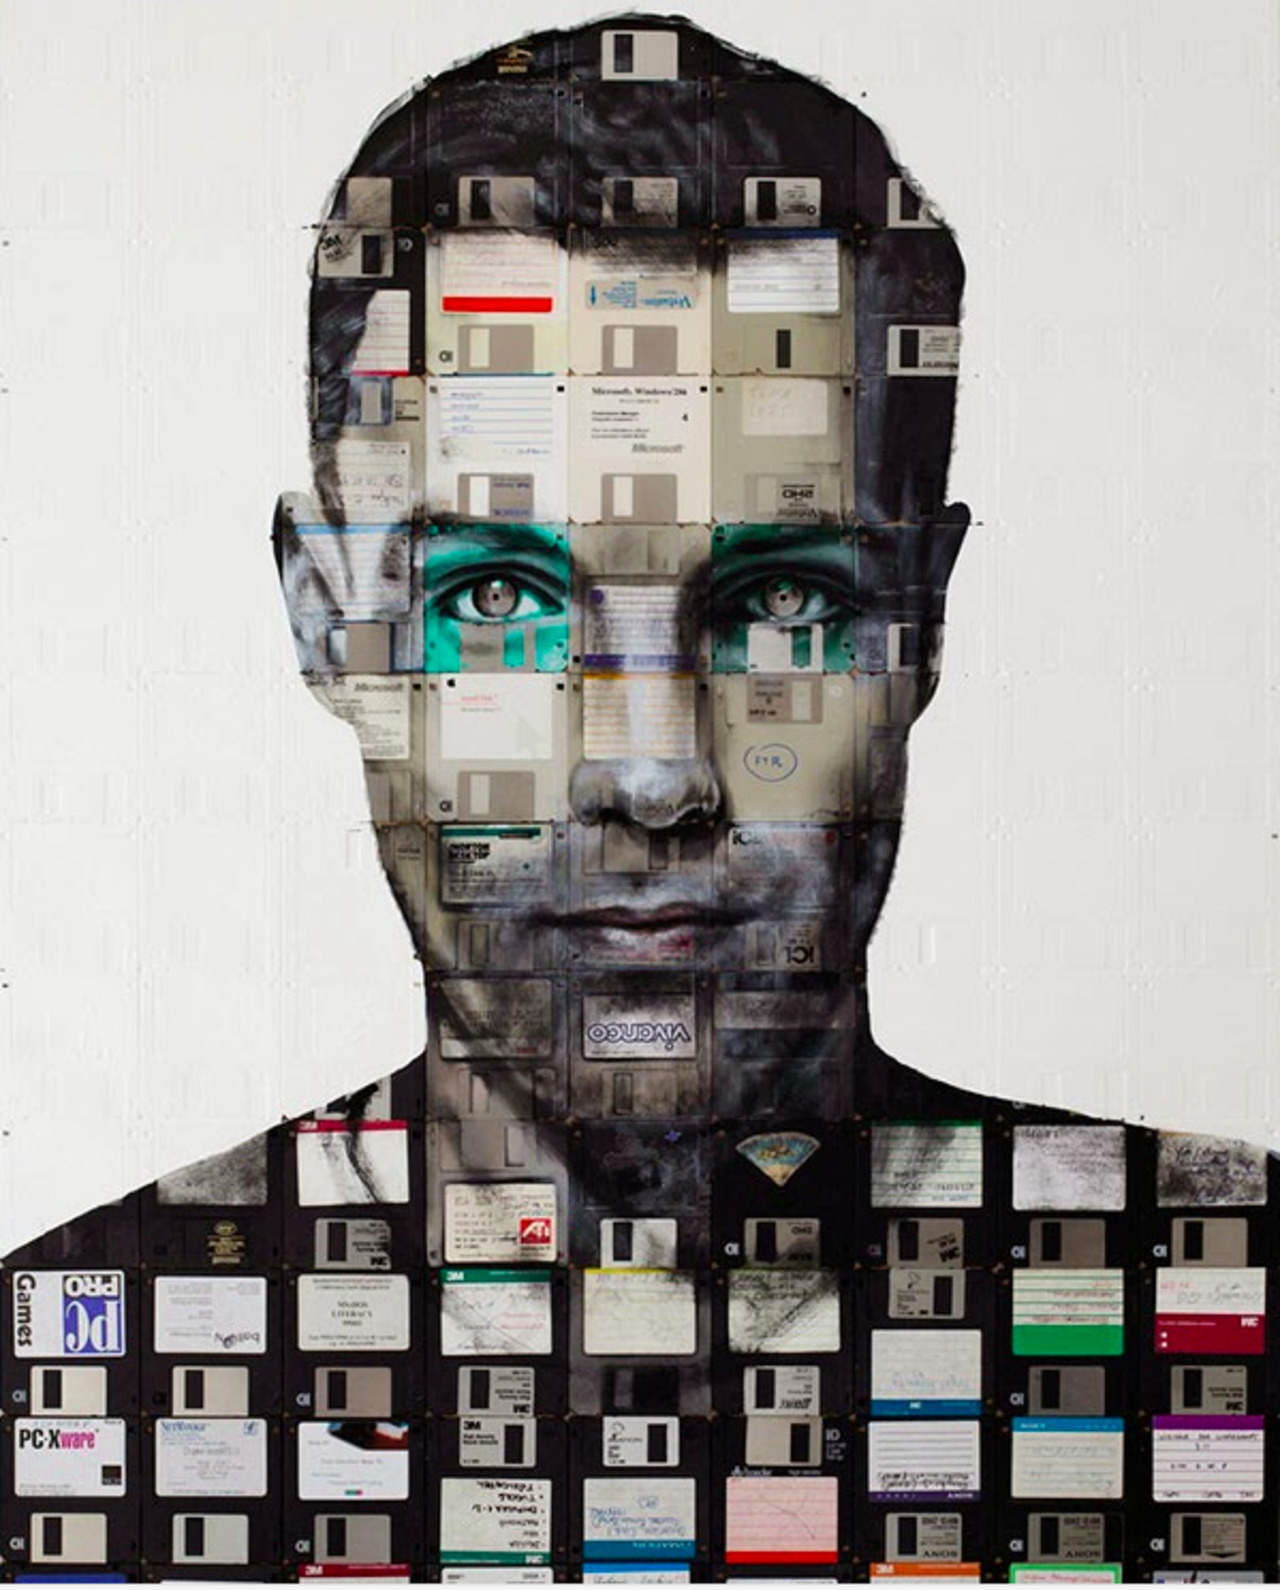 Mixed media #artwork by Nick Gentry #art #portrait 
http://www.faithistorment.com/search/label/art?updated-max=2014-08-27T05:57:00-07:00&max-results=20&start=76&by-date=false http://t.co/3VliJNSpv0